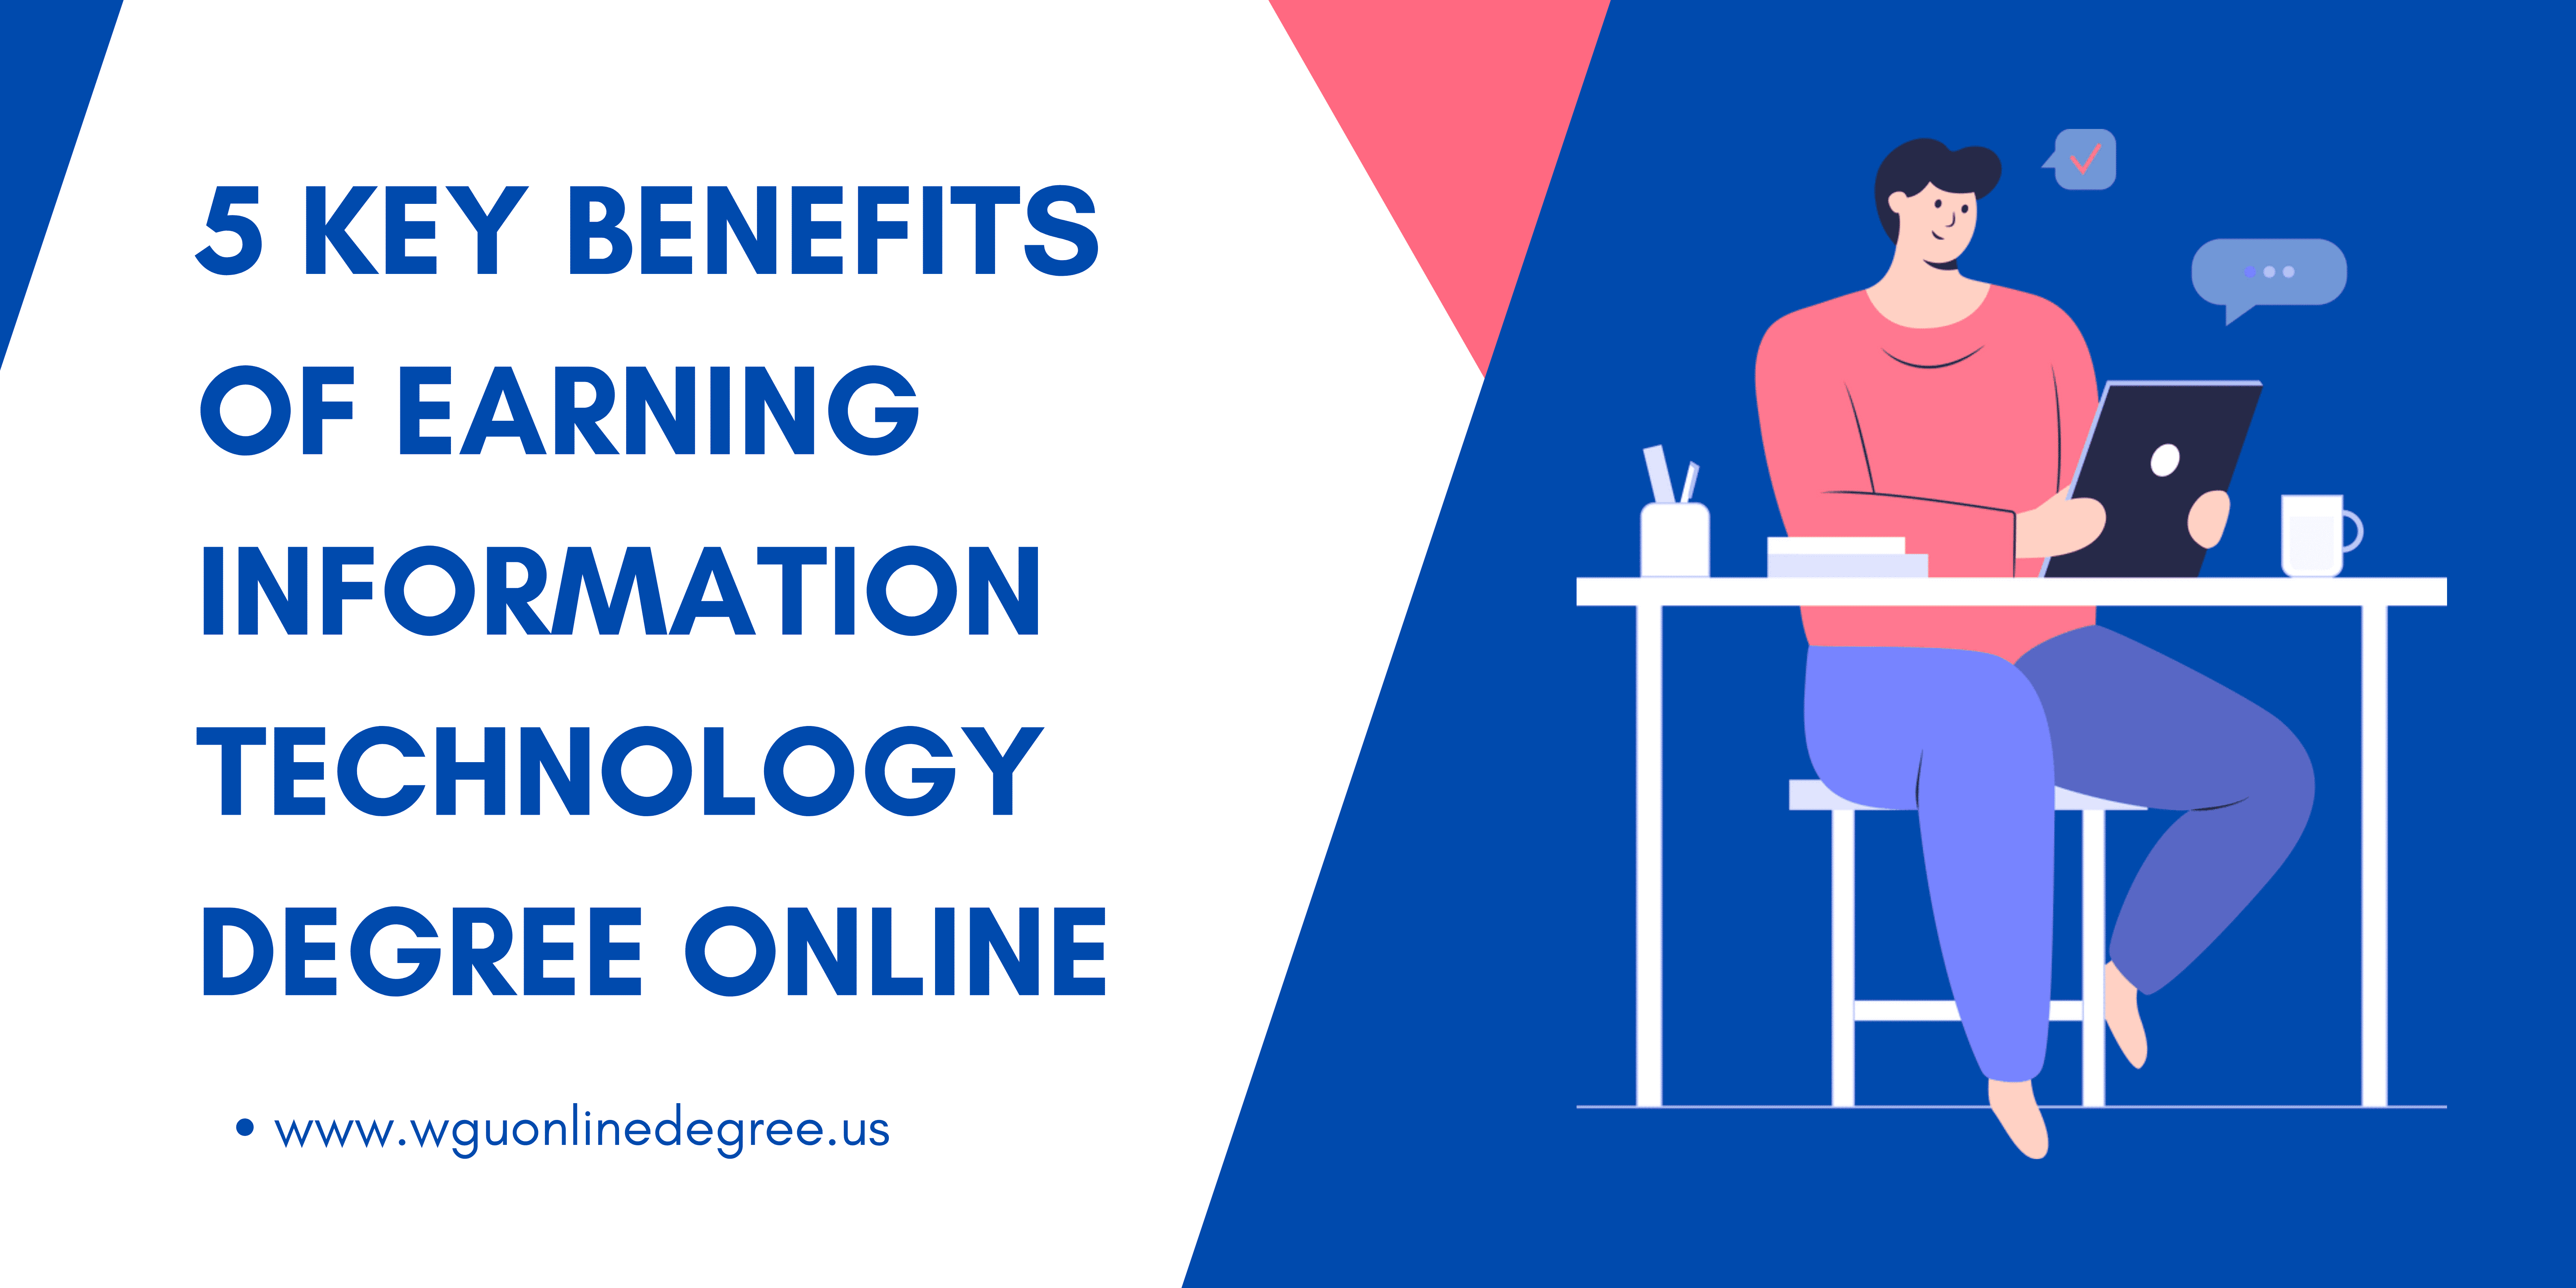 5 Key Benefits of Earning Information Technology Degree Online